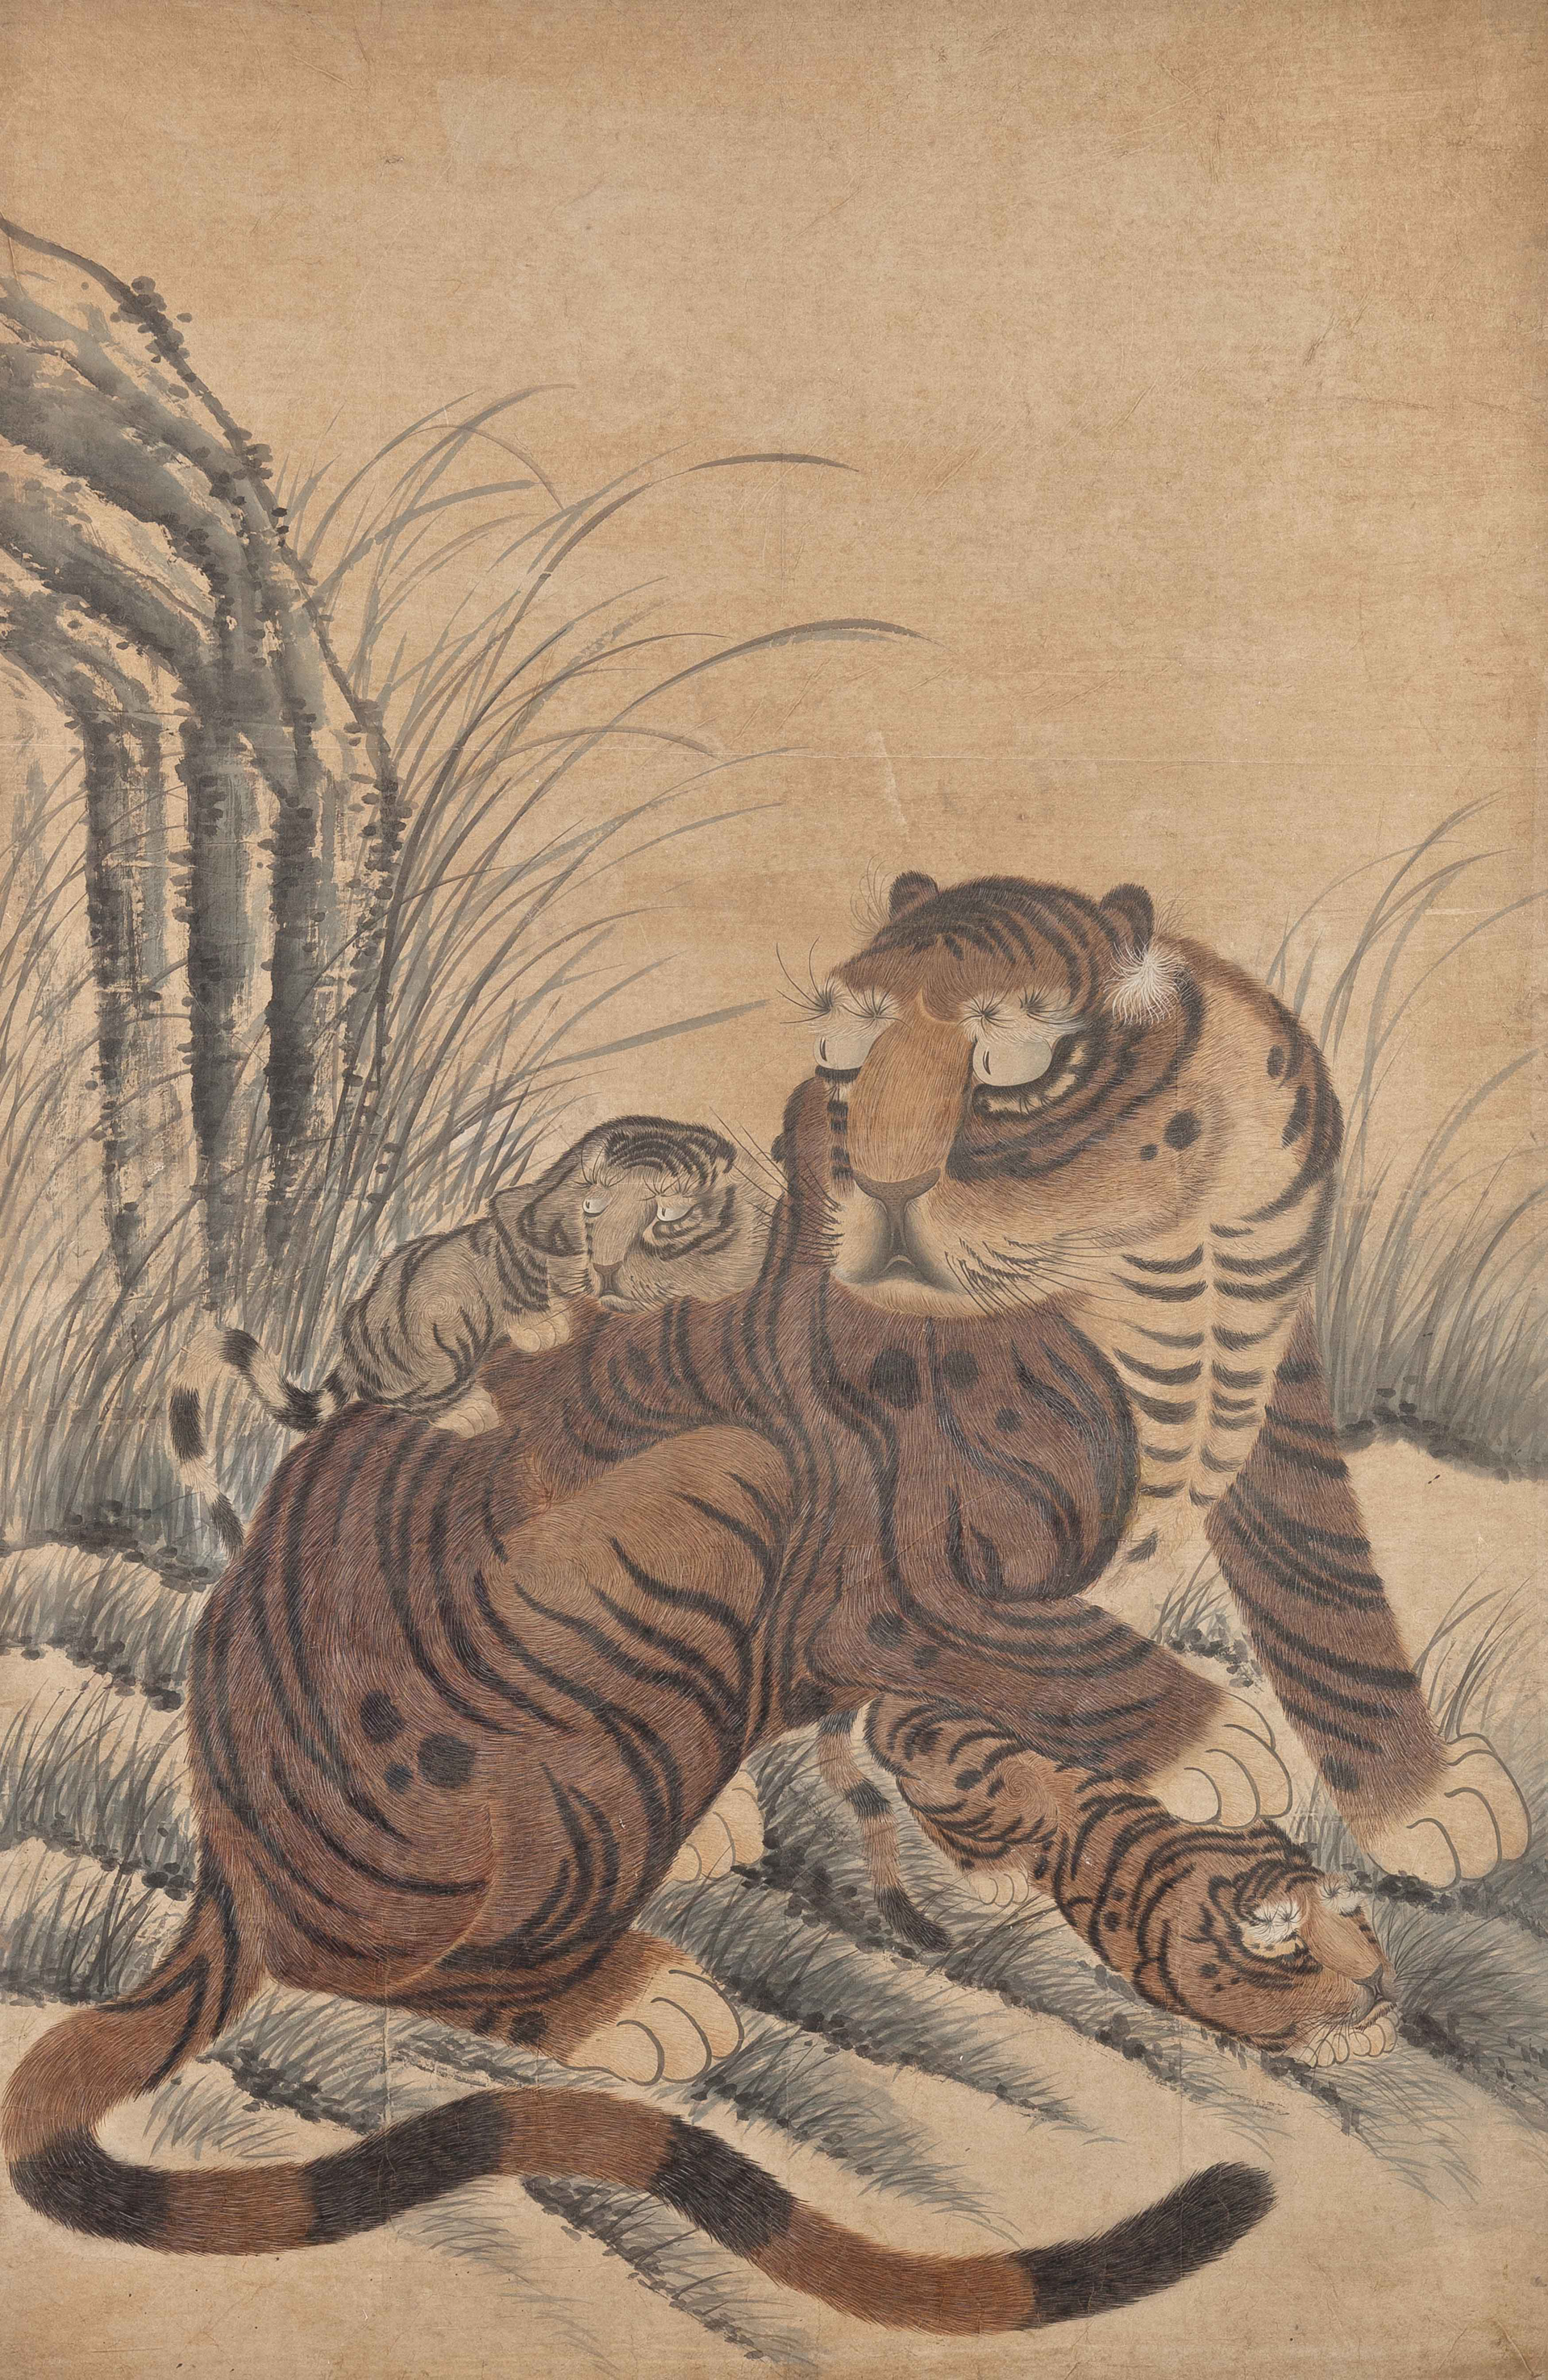 SCROLL PAINTING OF A TIGER WITH TWO CUBS